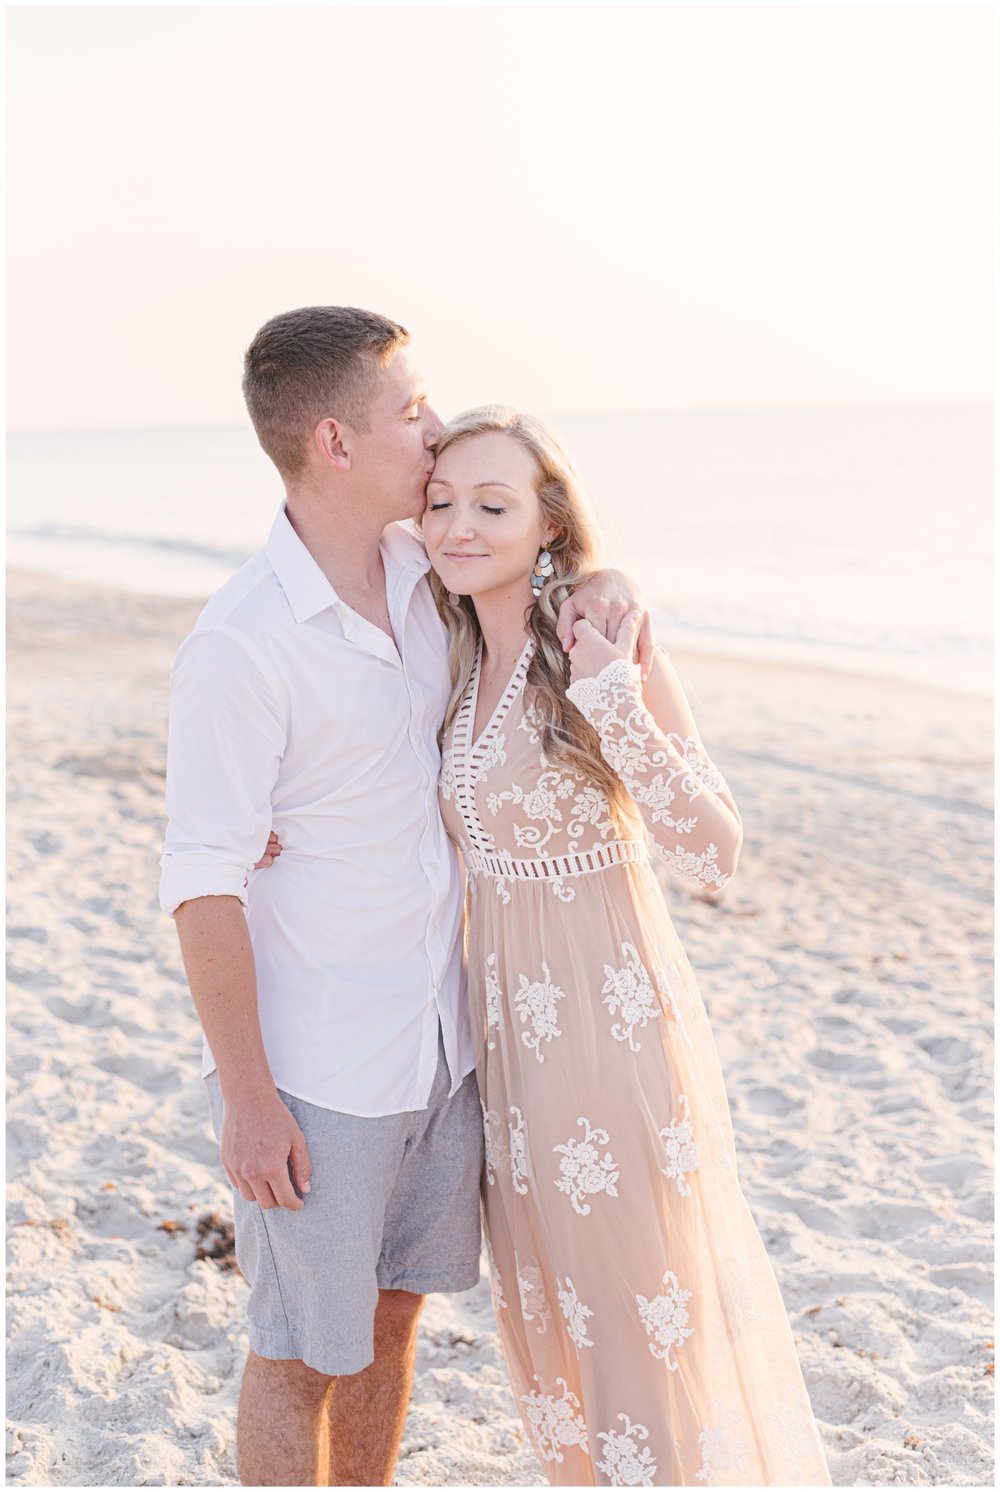 Man kissing fiancé during engagement session on beach with family beach photographer | 